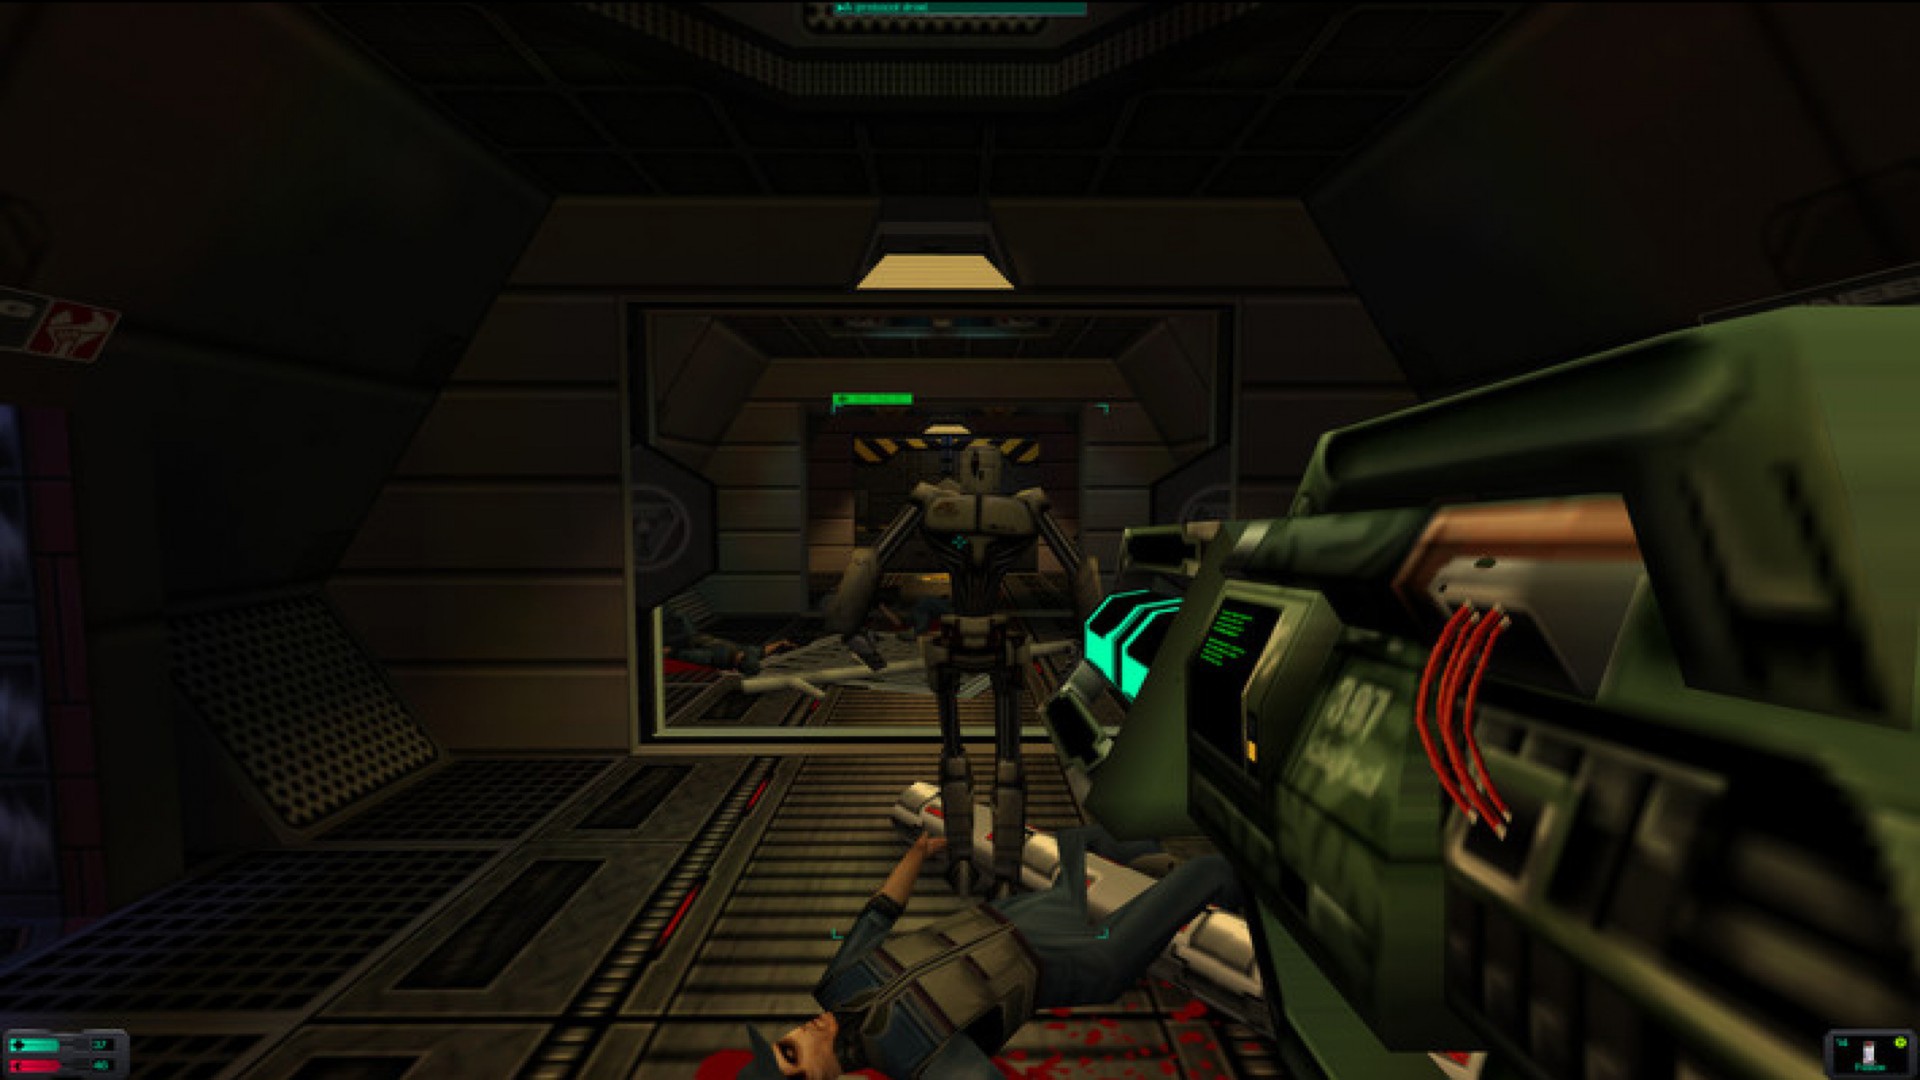 shtup system shock 2 nd